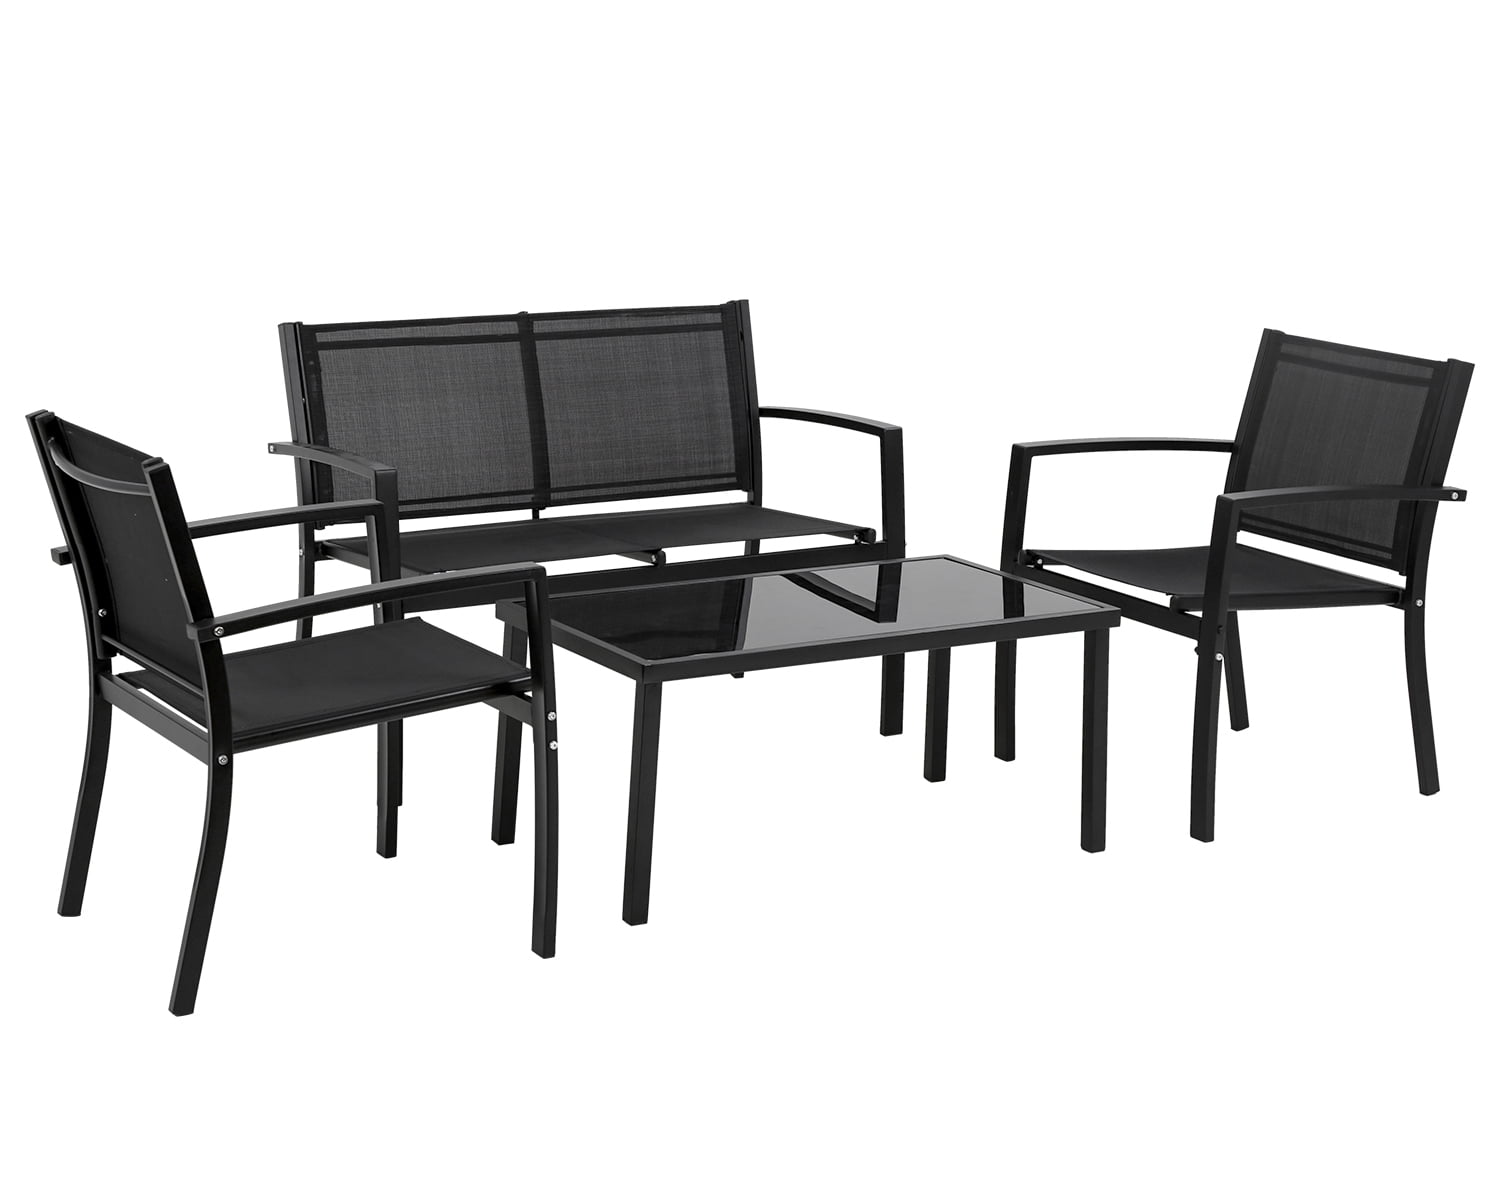 Patio Conversation Sets,Patio Furniture Outdoor Table And Chairs 4 Piece Patio Set with Metal Patio Furniture Tempered Glass Tabletop Waterproof Textilene For Outside Backyard Lawn Pool Deck